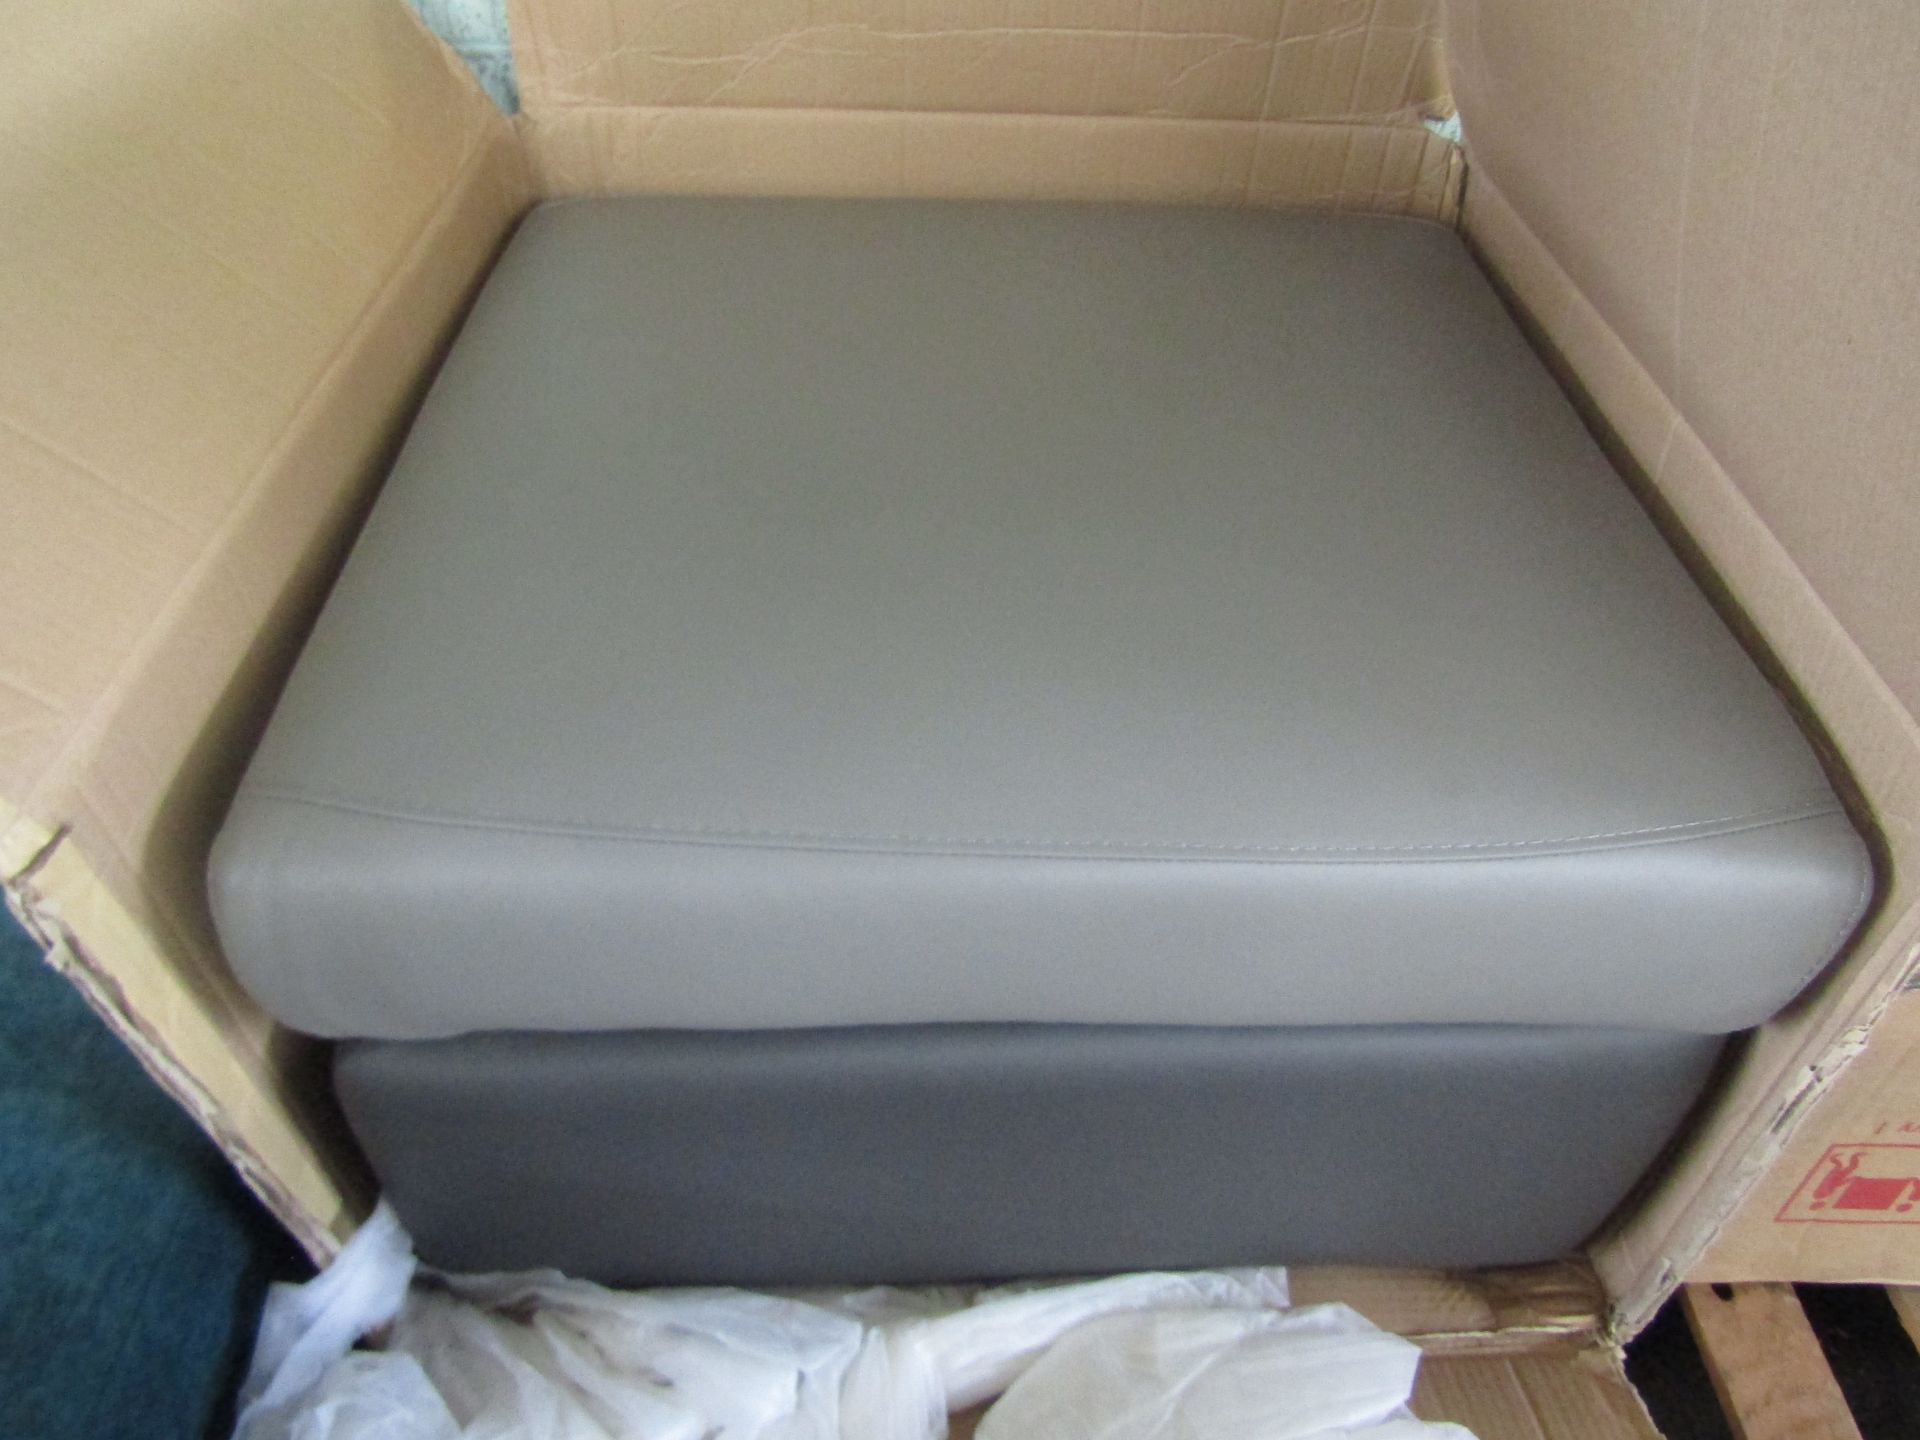 Pluto Storage Footstool G10 Light Grey Dark Grey Self Stitch RRP 379 About the Product(s) Pluto